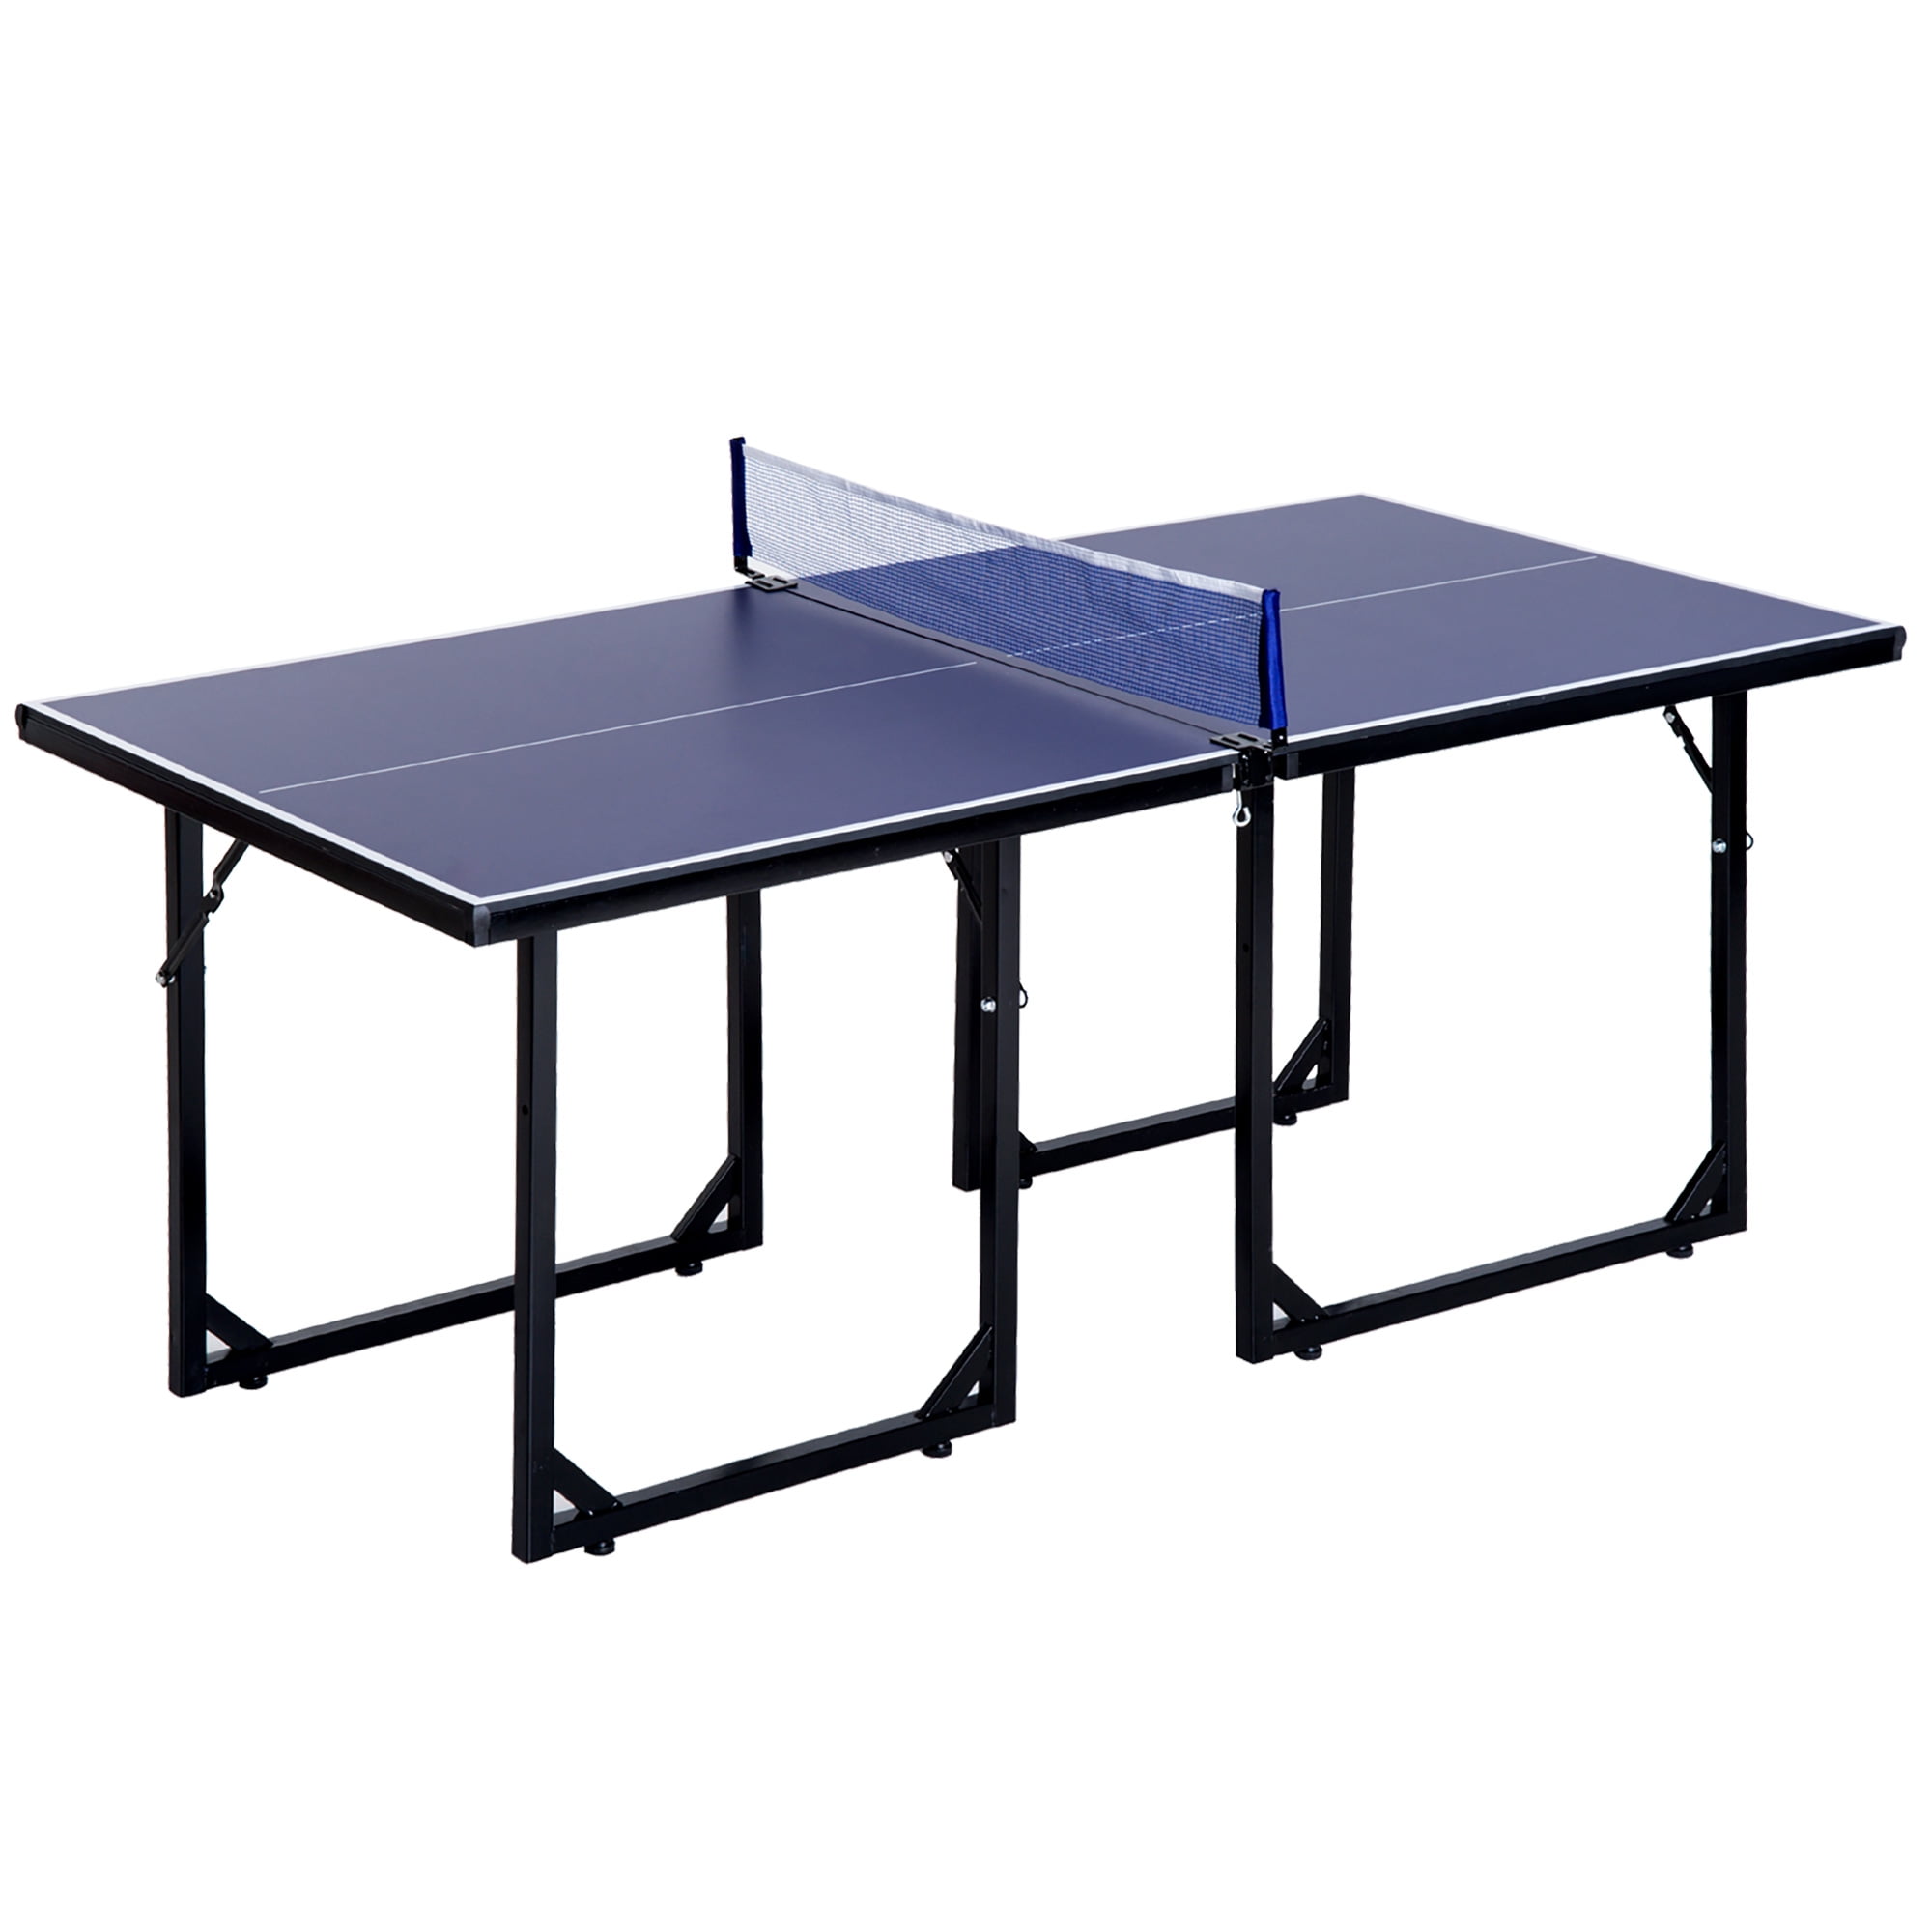 Soozier Foldable Ping Pong Table Set Basement Game, Table Tennis